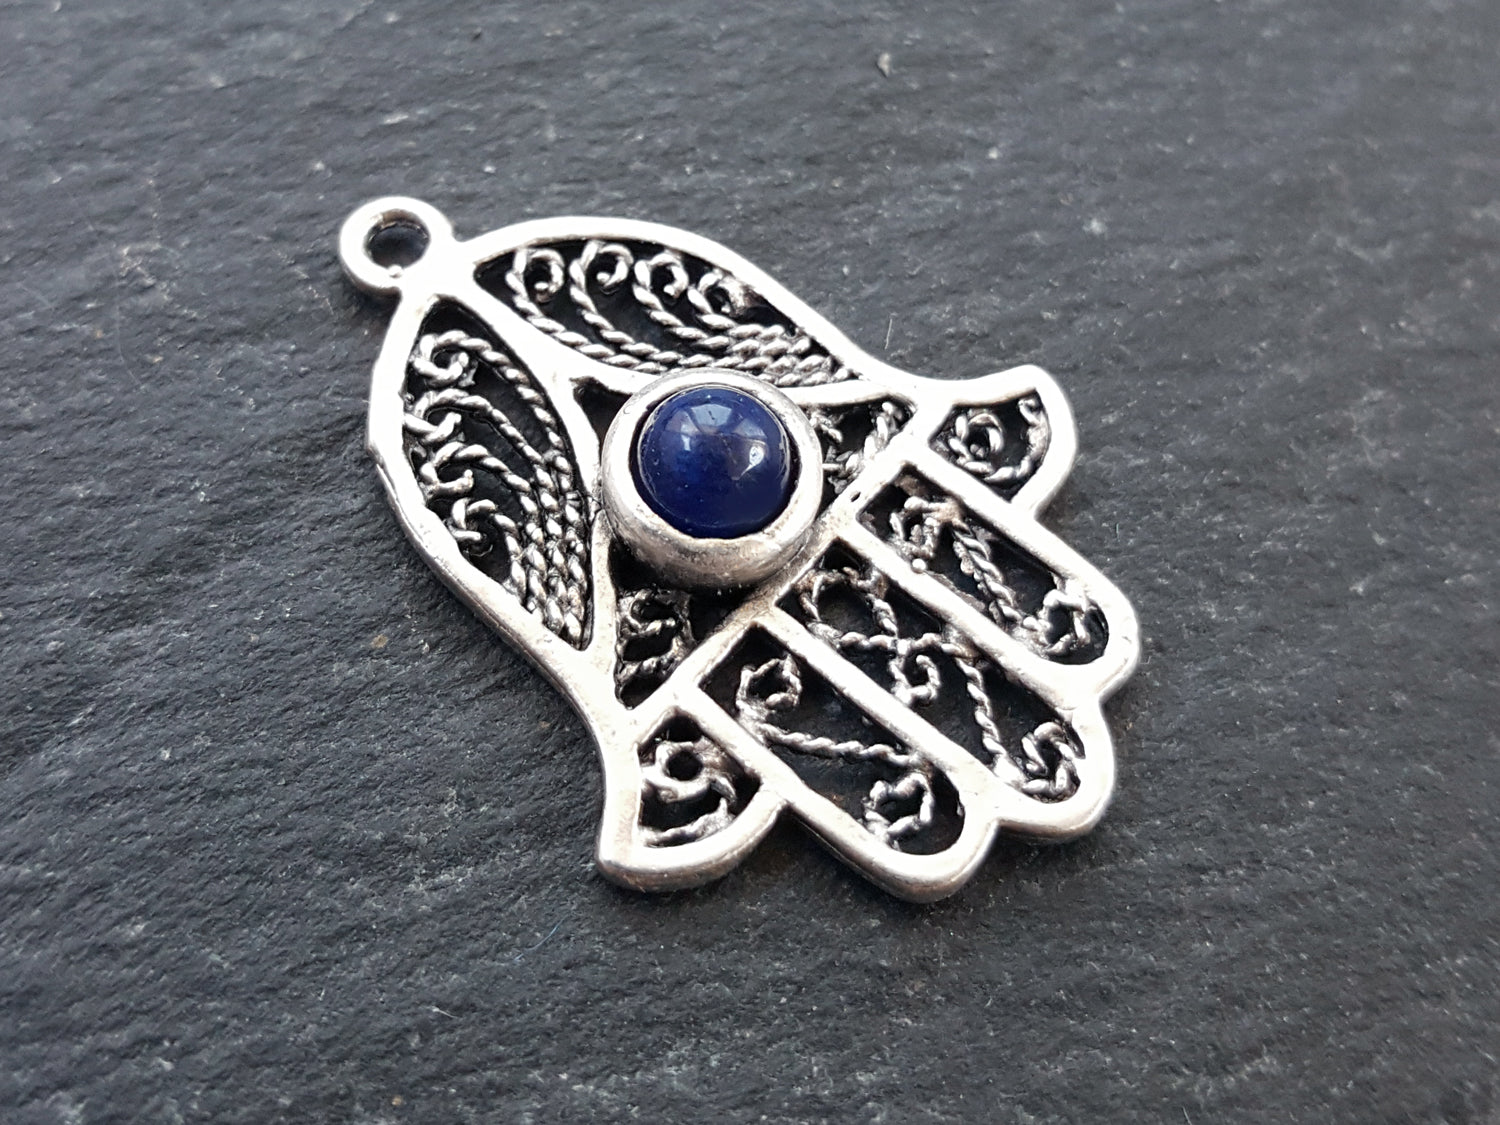 Filigree Hand of Fatima Hamsa Pendant Charm with Navy Blue Smooth Cut Jade Accent - Antique Matte Silver Plated